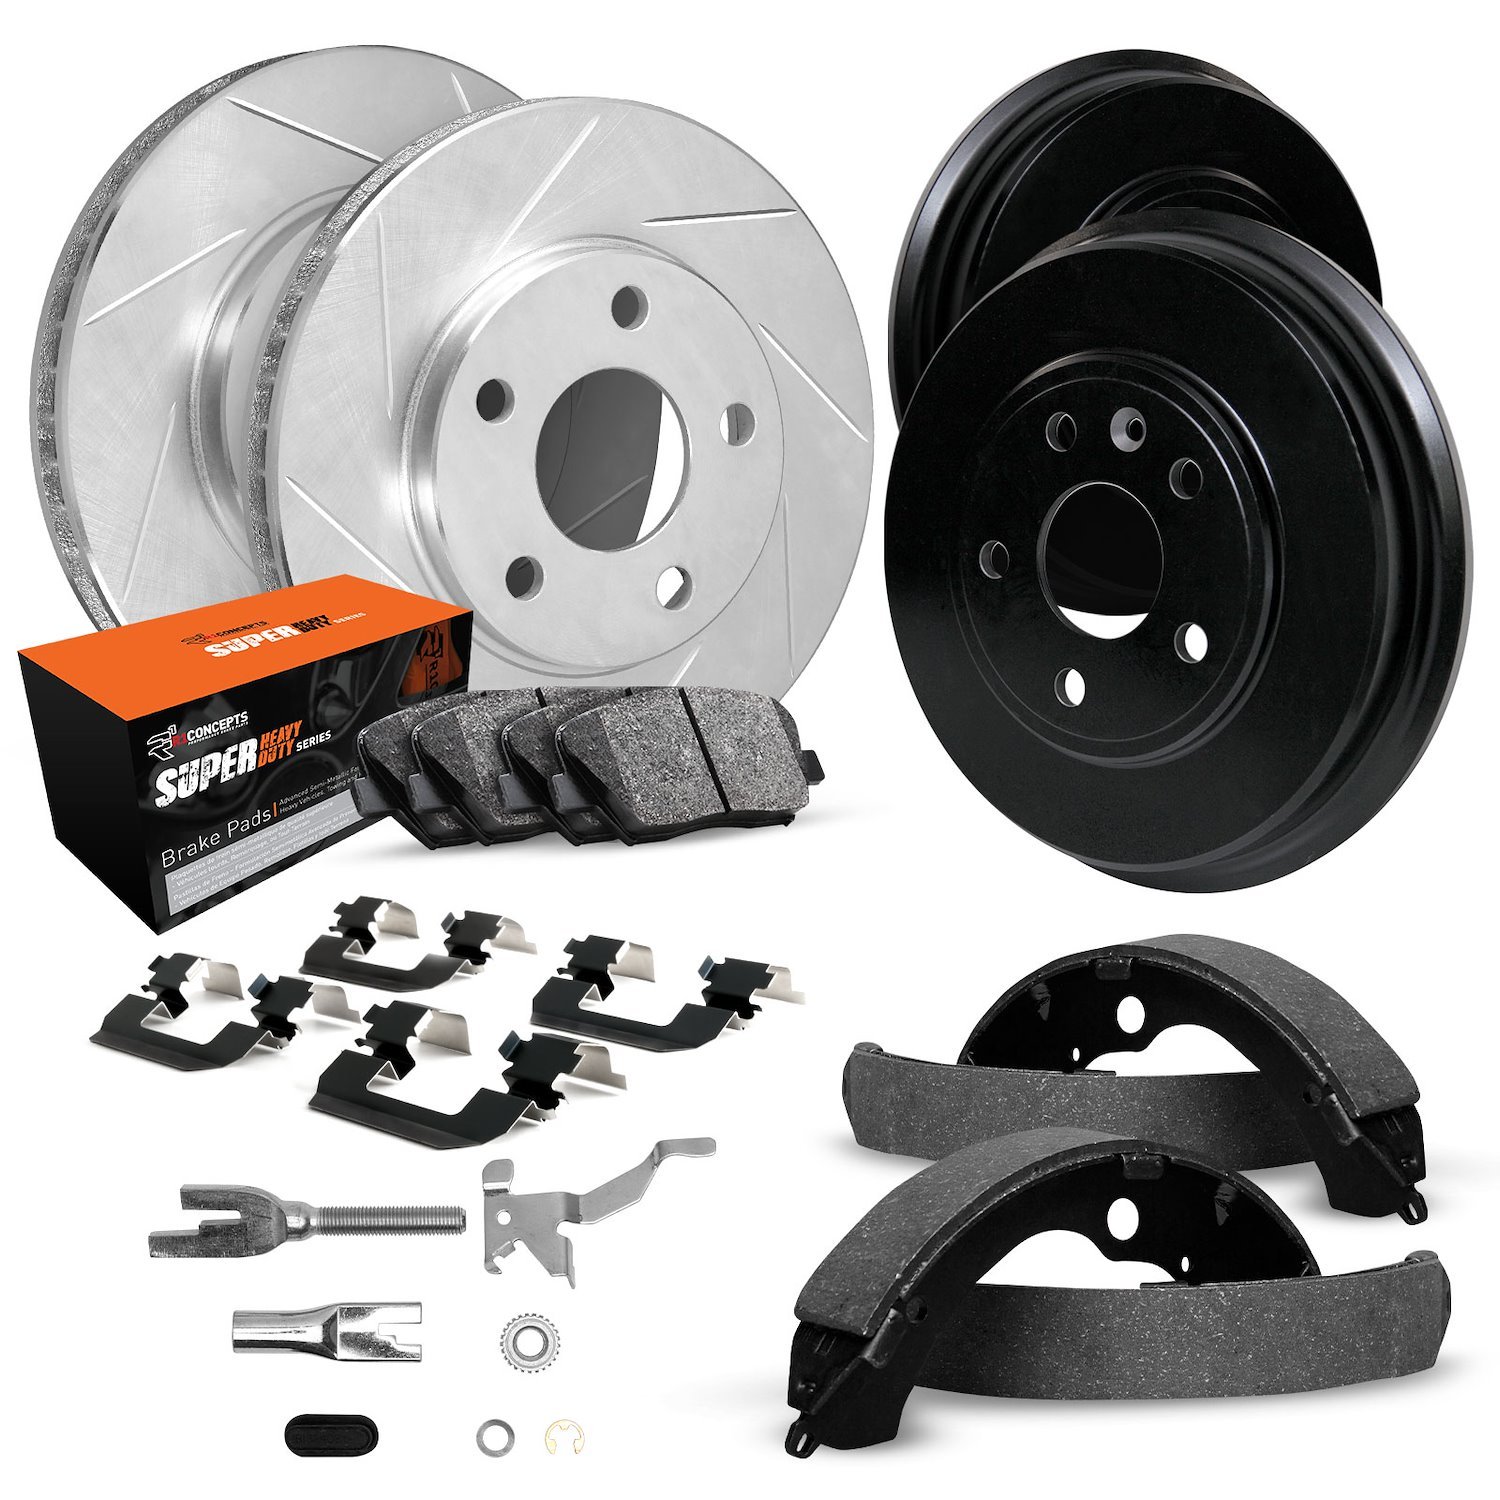 E-Line Slotted Silver Rotor & Drum Set w/Super-Duty Pads, Shoes/Hardware/Adjusters, Fits Select Lexus/Toyota/Scion